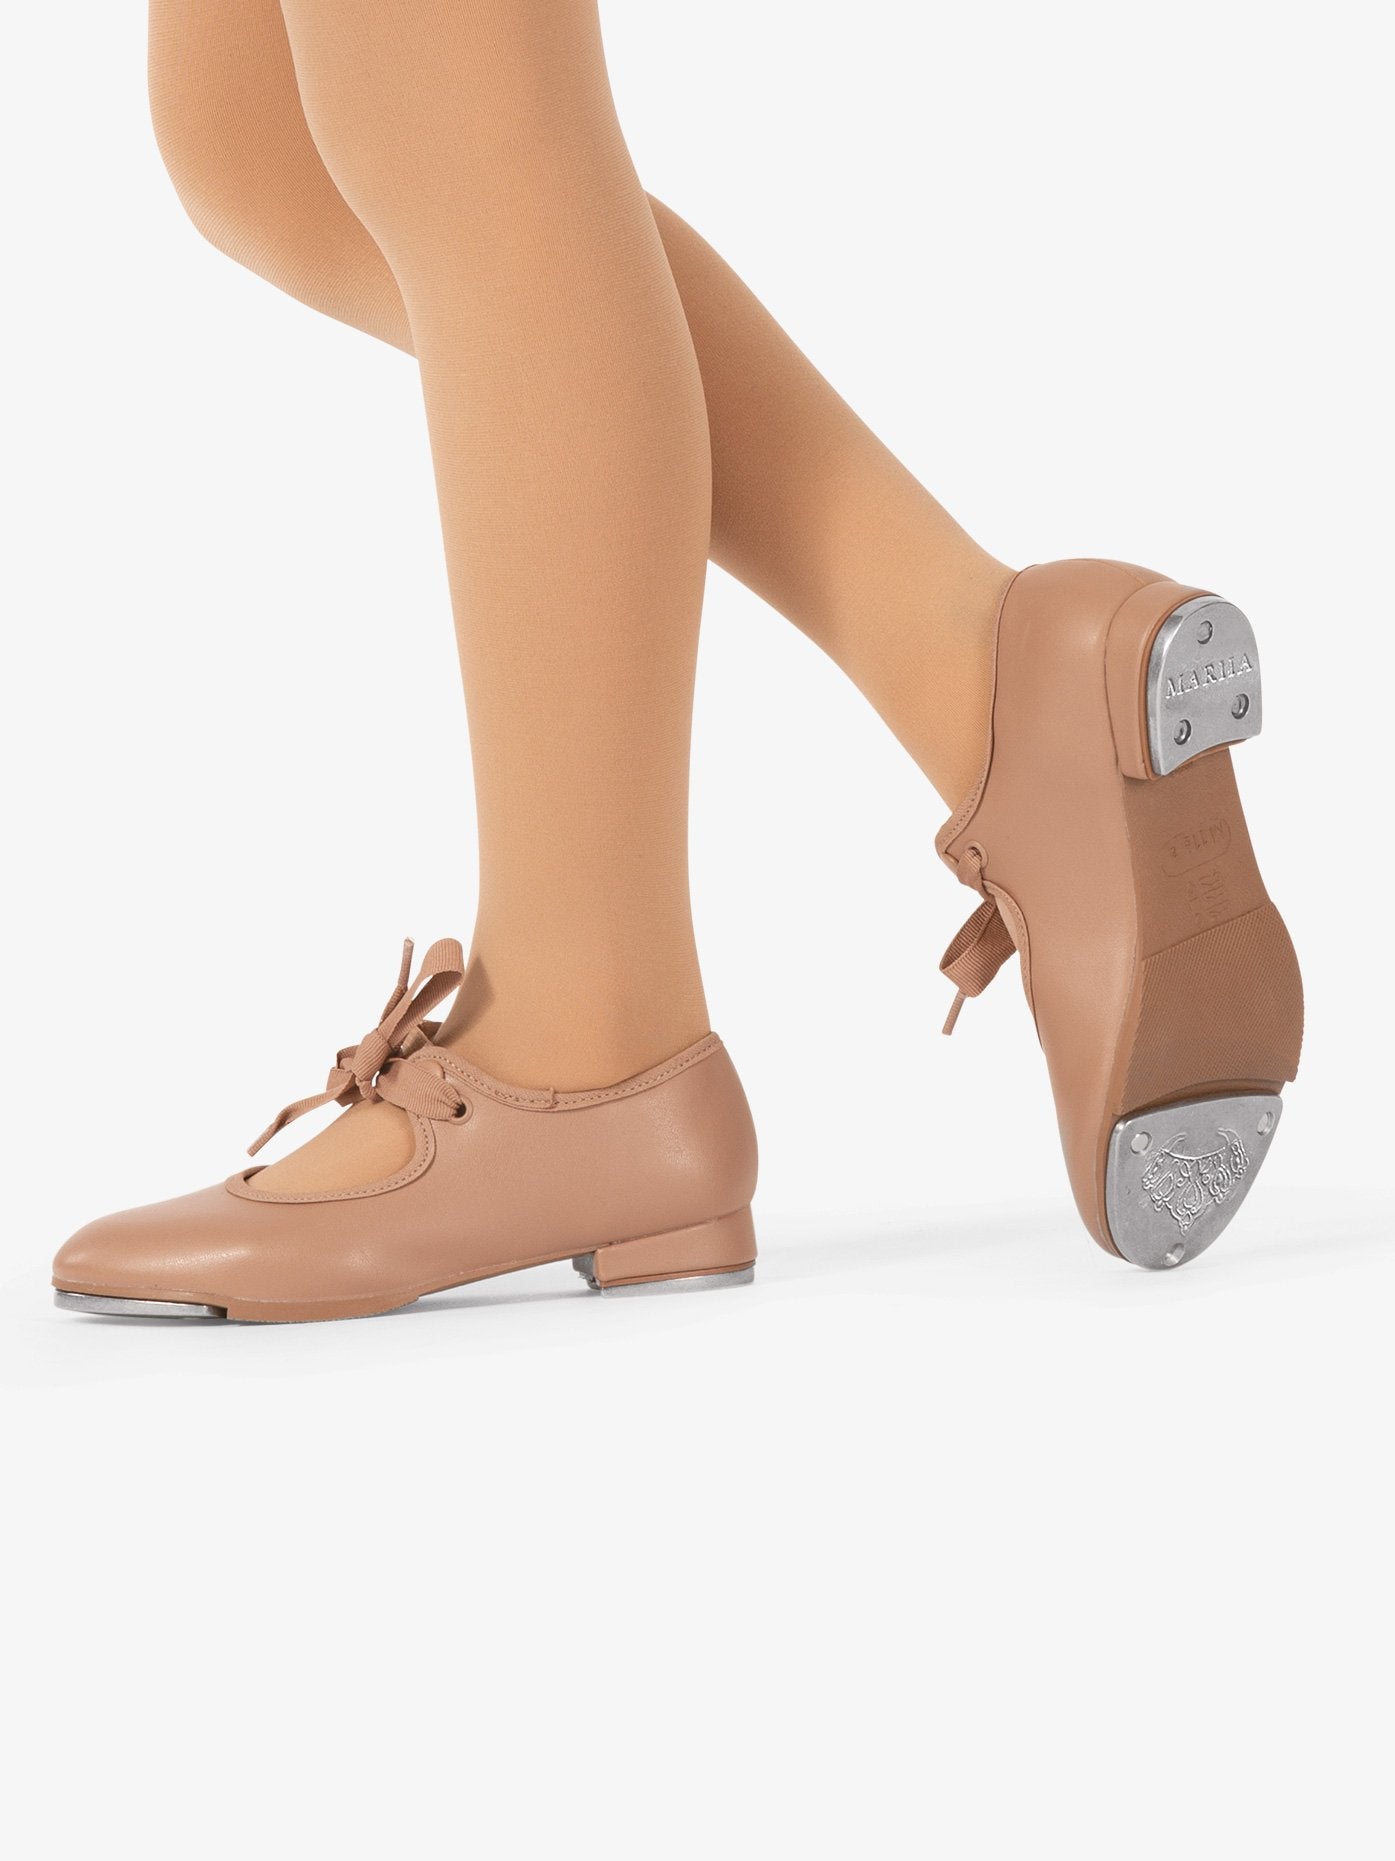 Girls' vegan tan tap shoes with ribbon tie for secure fit